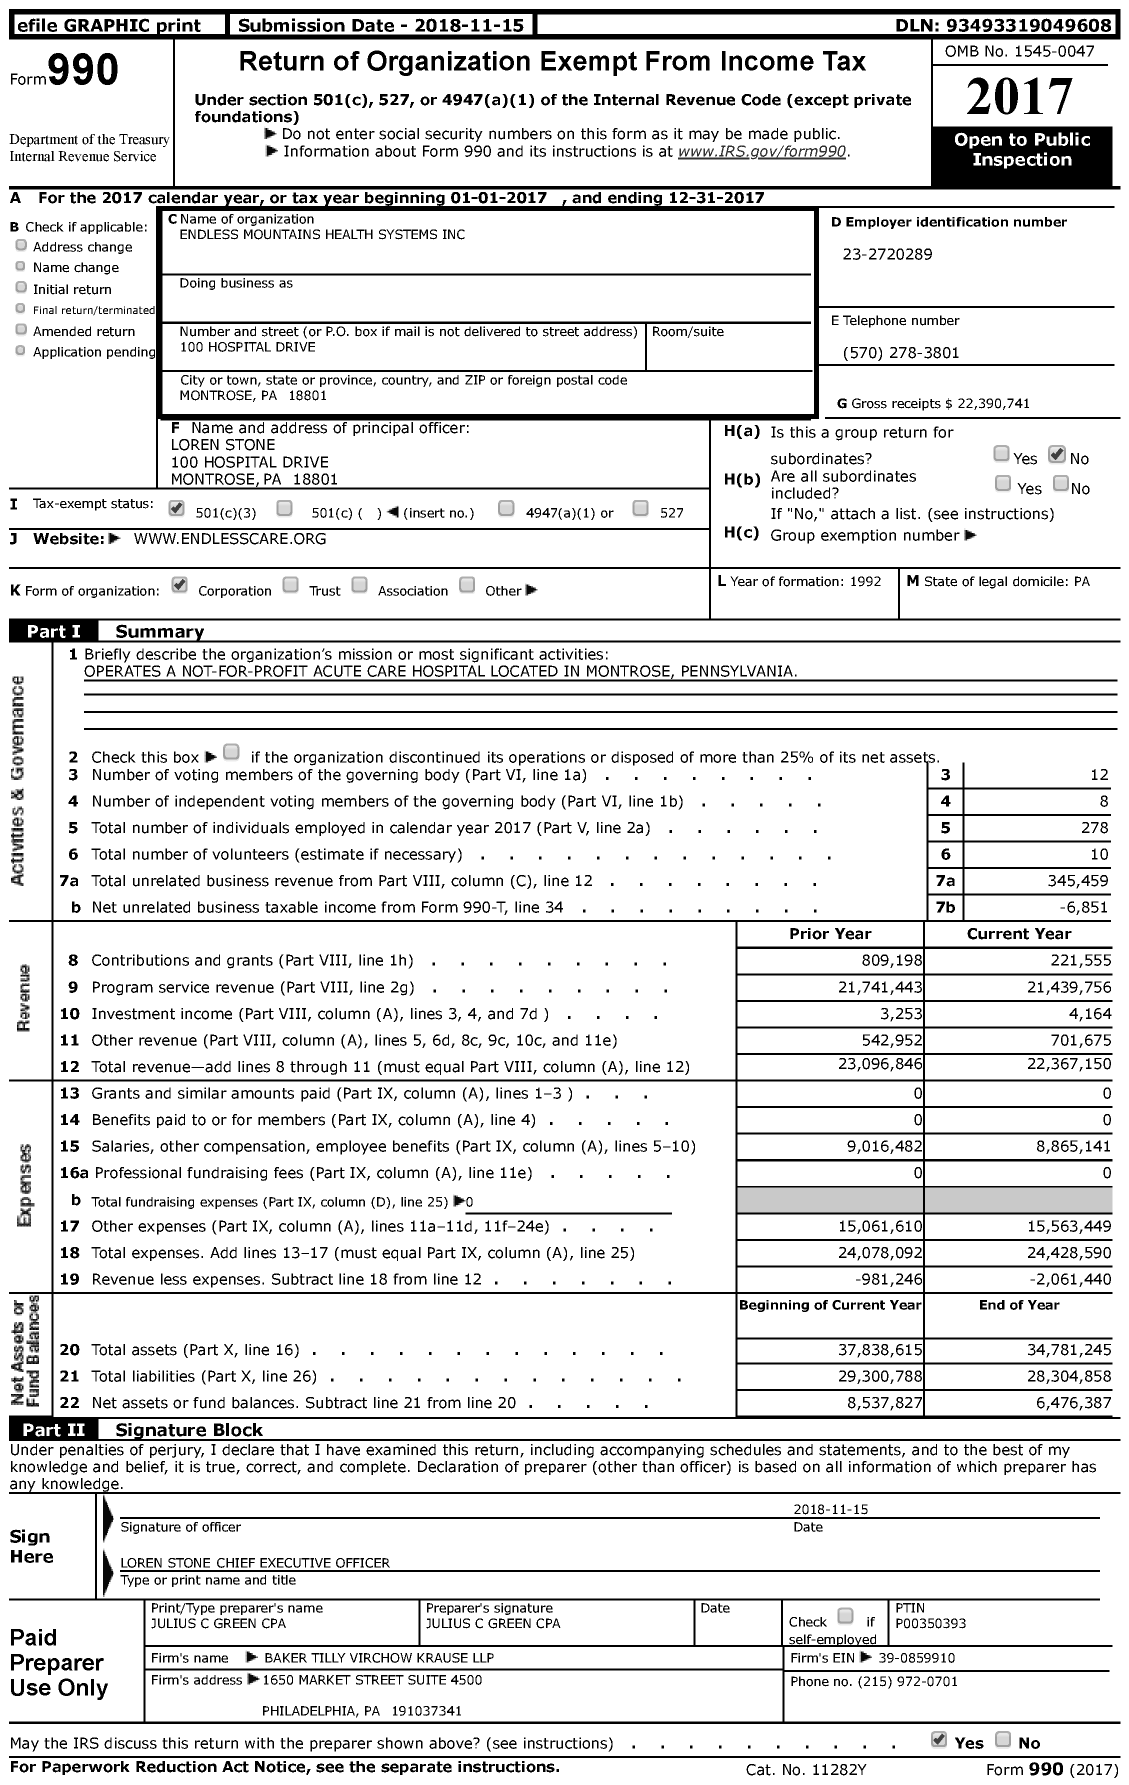 Image of first page of 2017 Form 990 for Endless Mountains Health Systems (EMHS)